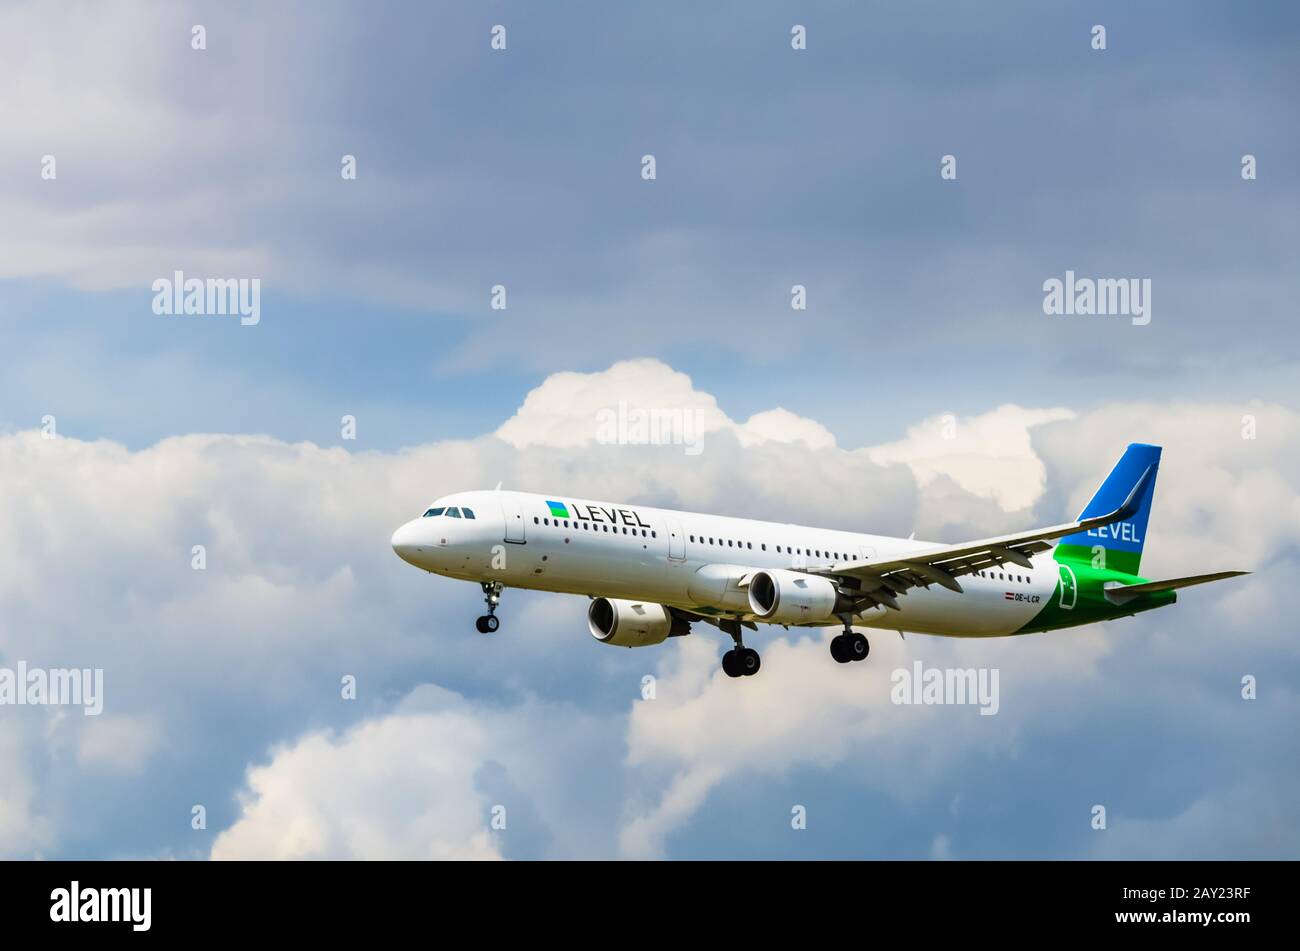 Barcelona, Spain; May 18, 2019: Airbus A320 plane of the company Level, landing at El Prat Airport in Barcelona Stock Photo